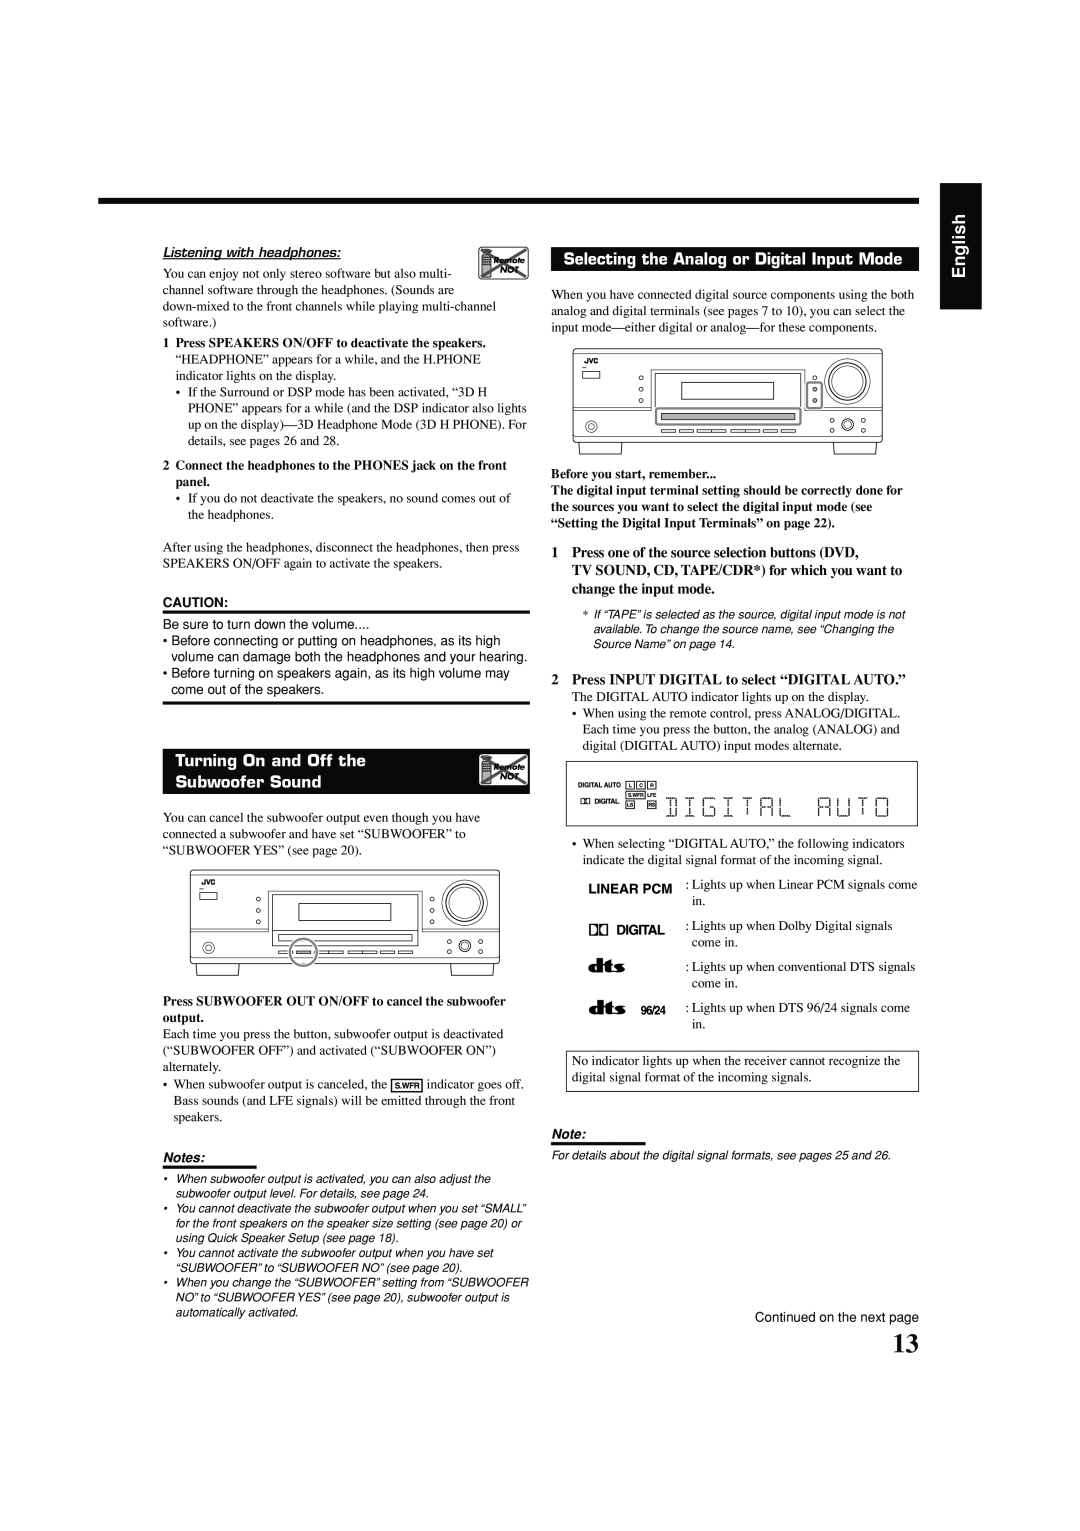 JVC LVT1140-004A manual English, Turning On and Off the, Subwoofer Sound, Selecting the Analog or Digital Input Mode 